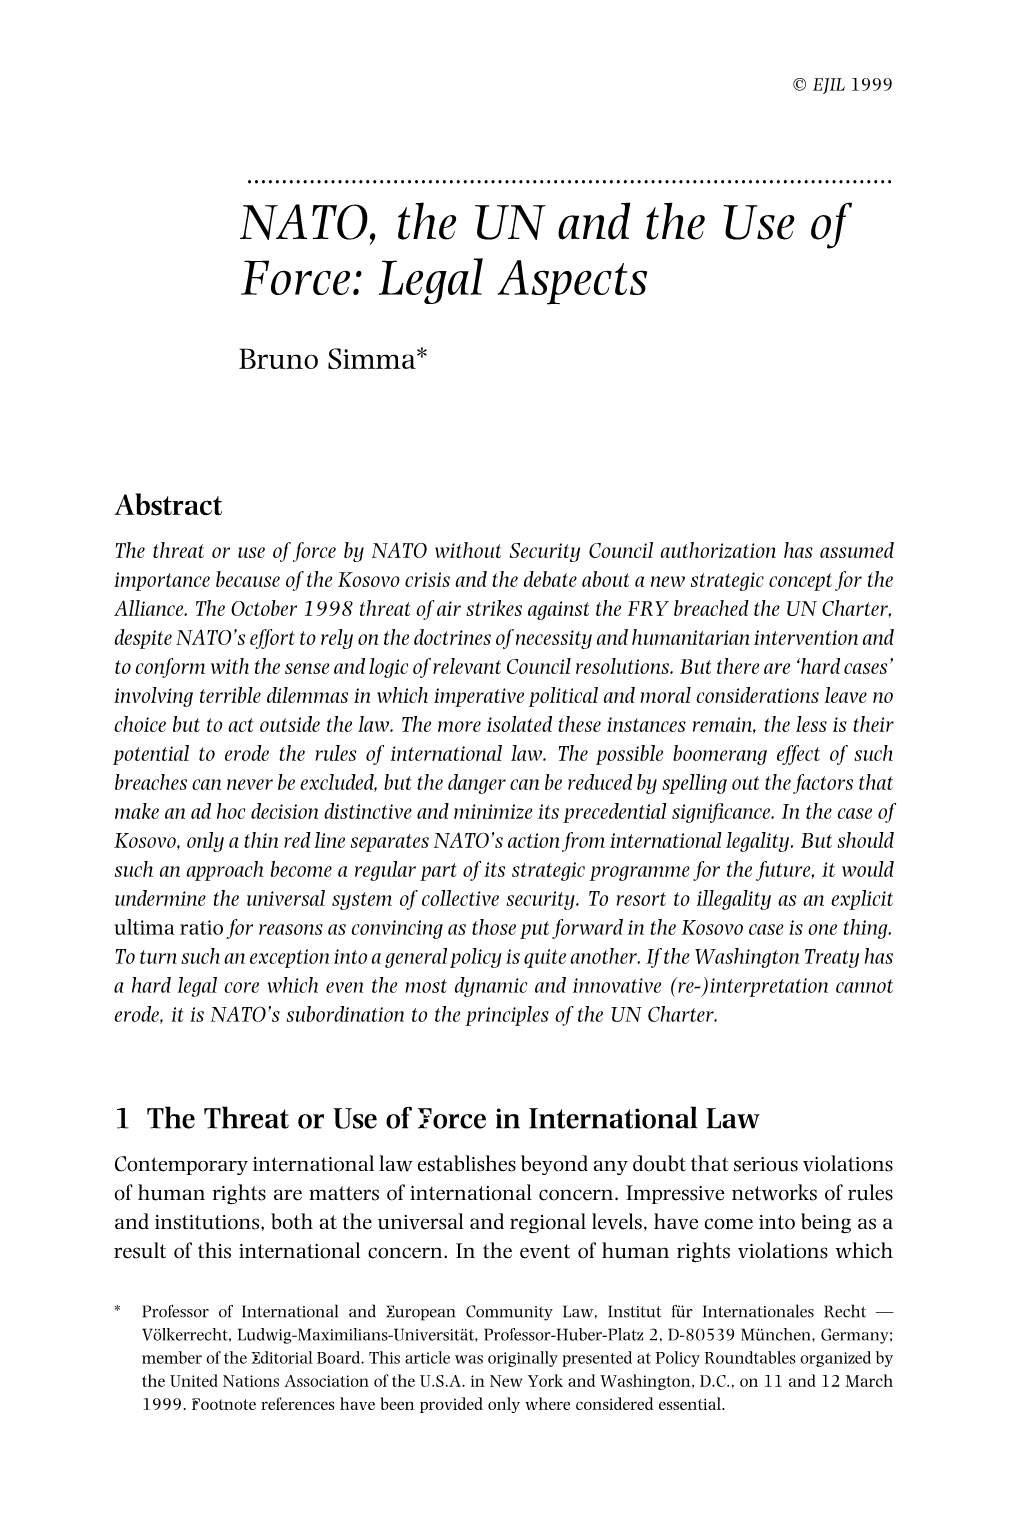 NATO, the UN and the Use of Force: Legal Aspects